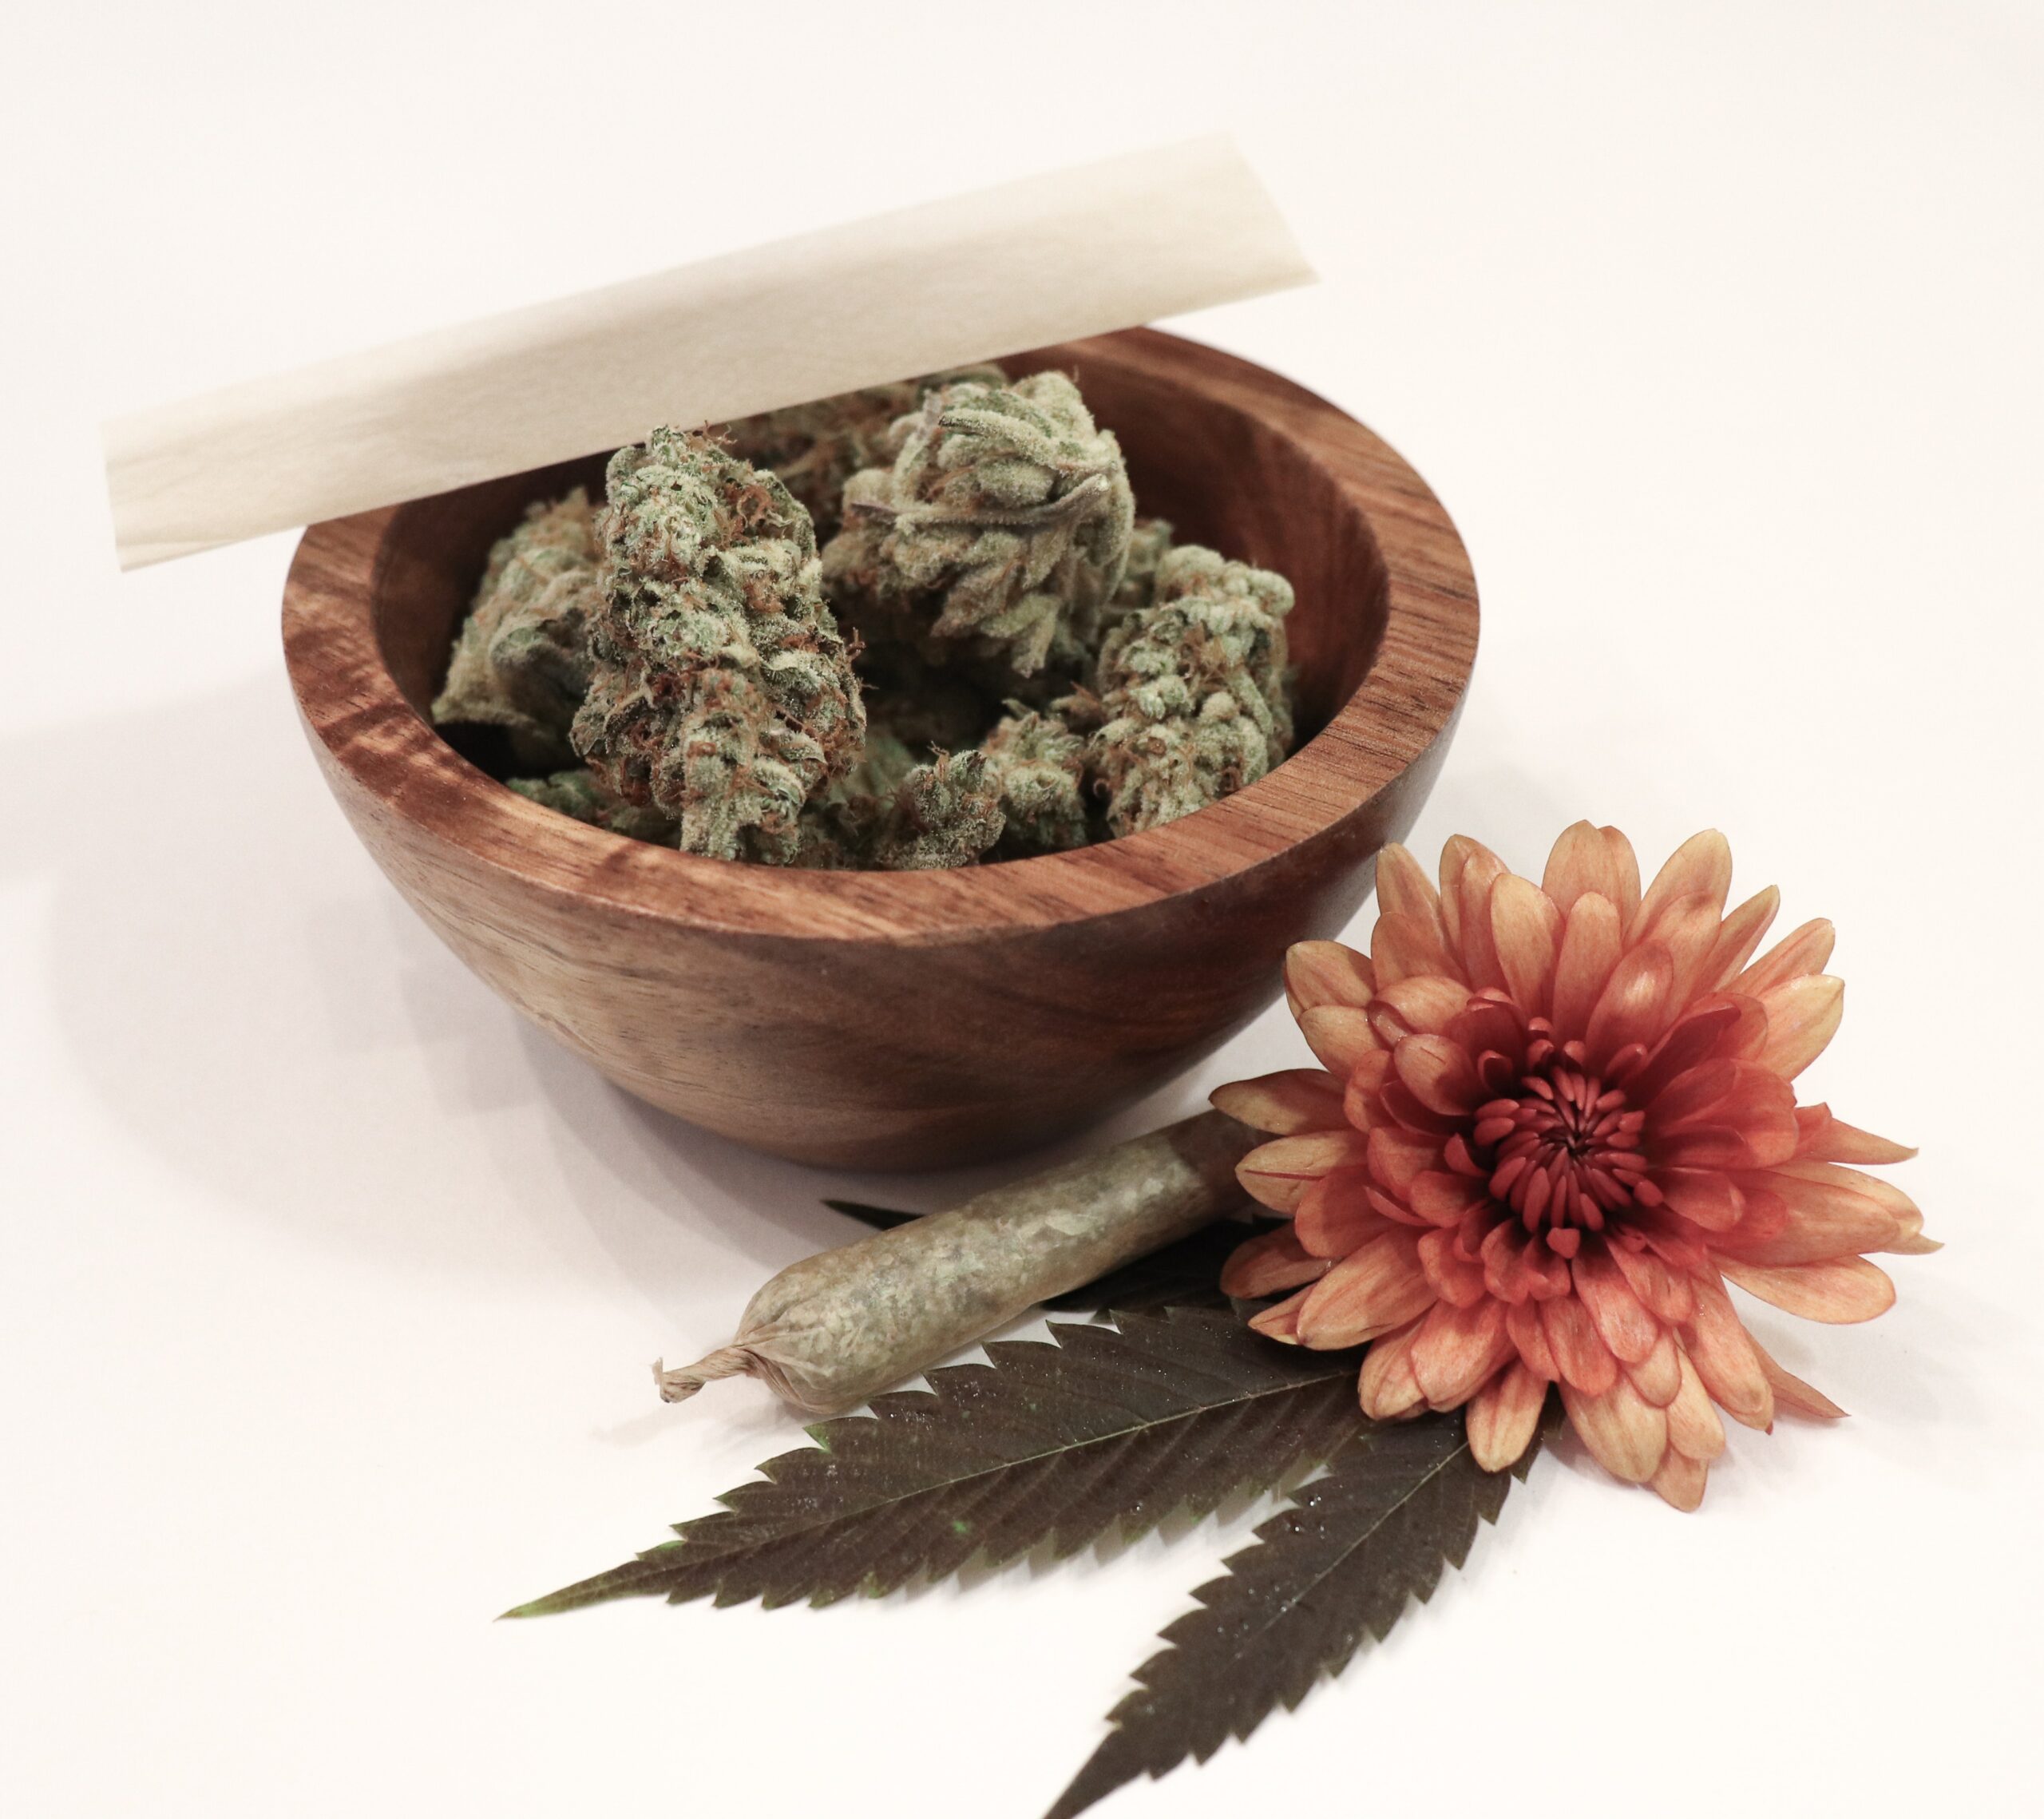 A rolling paper sits atop a wooden bowl with cannabis flower; a rolled joint and red-orange flower sit on the white surface beside the bowl.